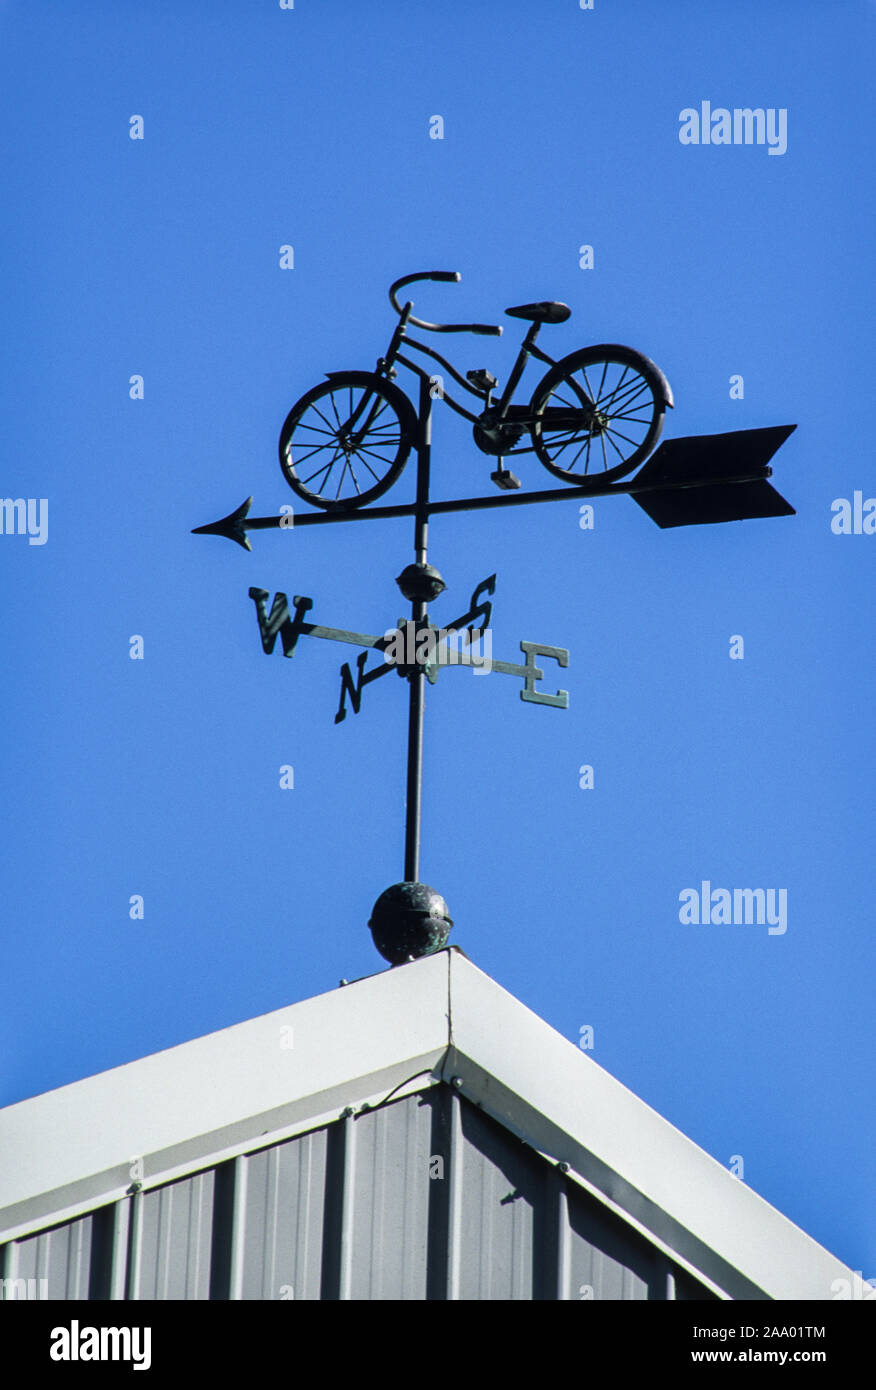 Bicycle weathervane at a bike shop and against blue sky on a rooftop,  Lancaster County, Pennsylvania, PA images US, USA, FS 16.74MB, 300ppi sign  Stock Photo - Alamy